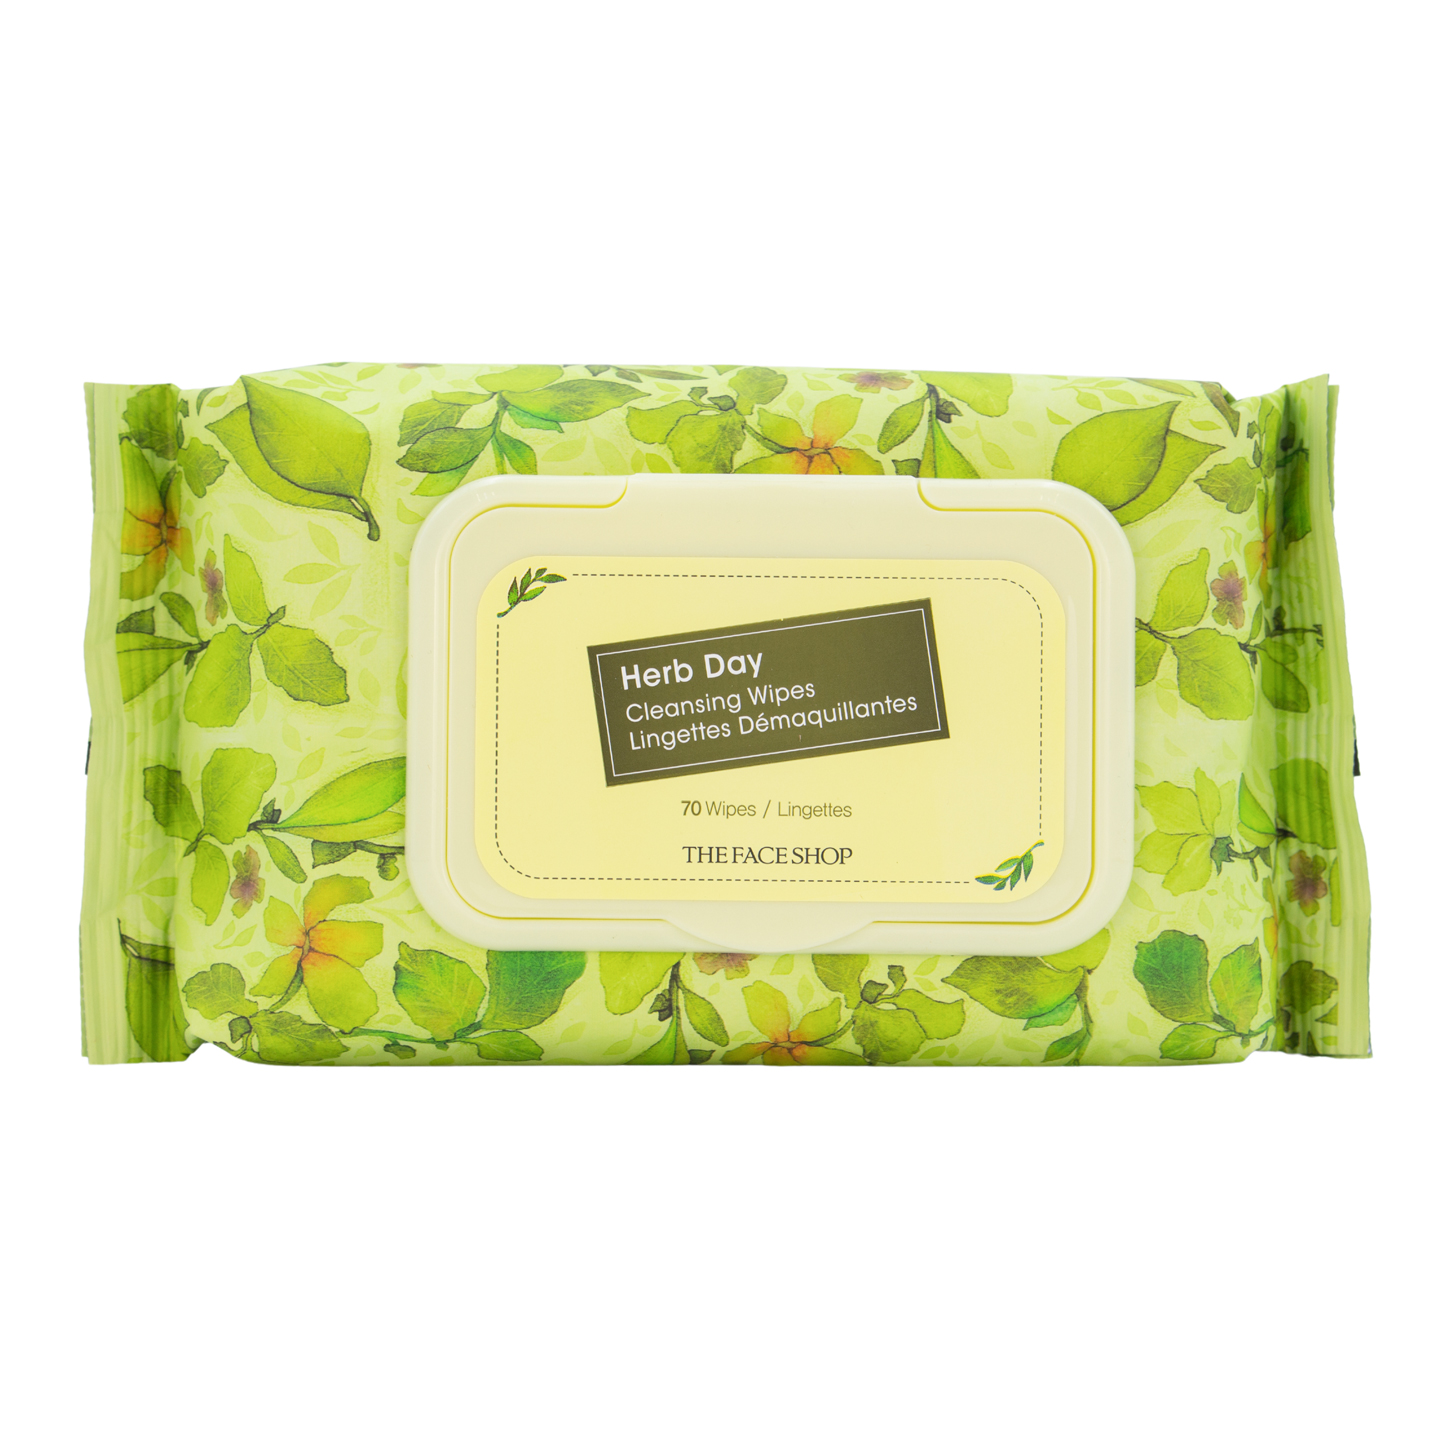 Herb Day Cleansing Tissue (70) Big 18Ea